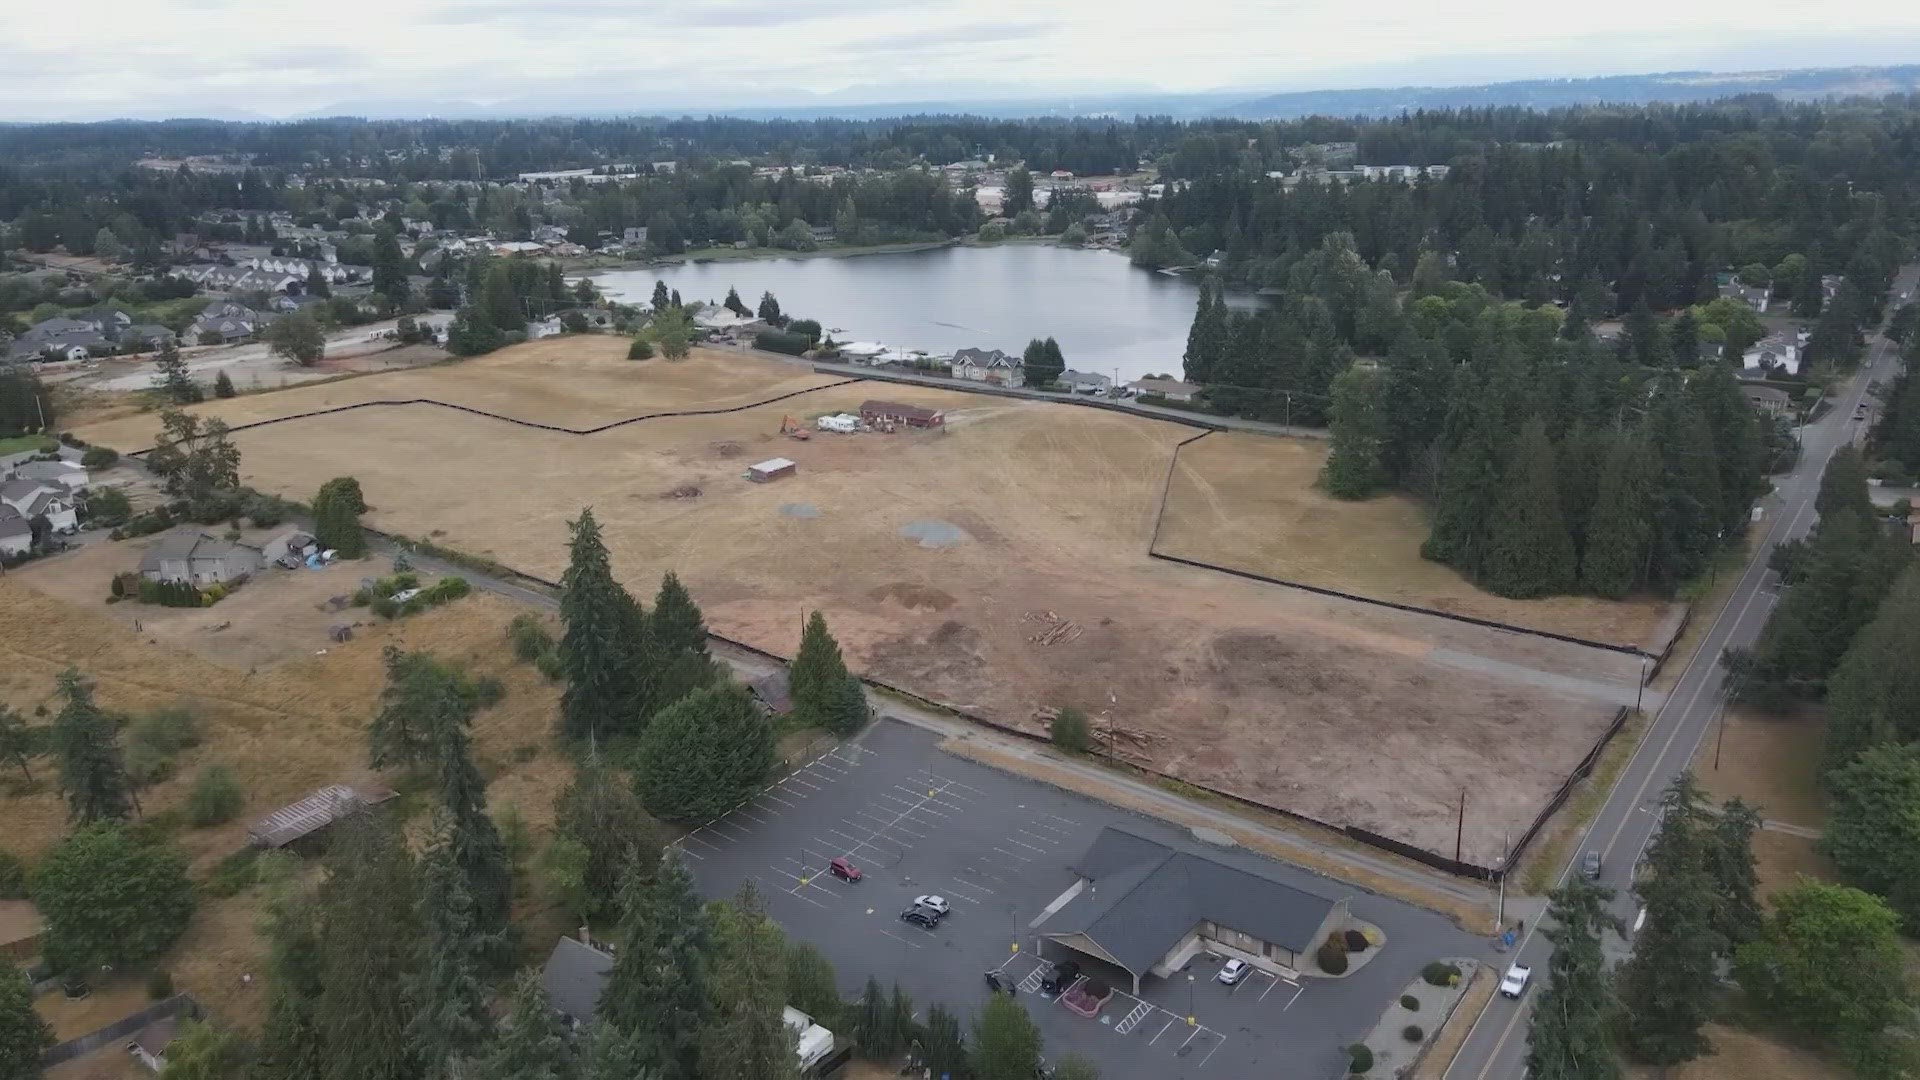 The state is coming down on the controversial building of a megachurch in Pierce County. State officials say church contractors are violating environmental laws.